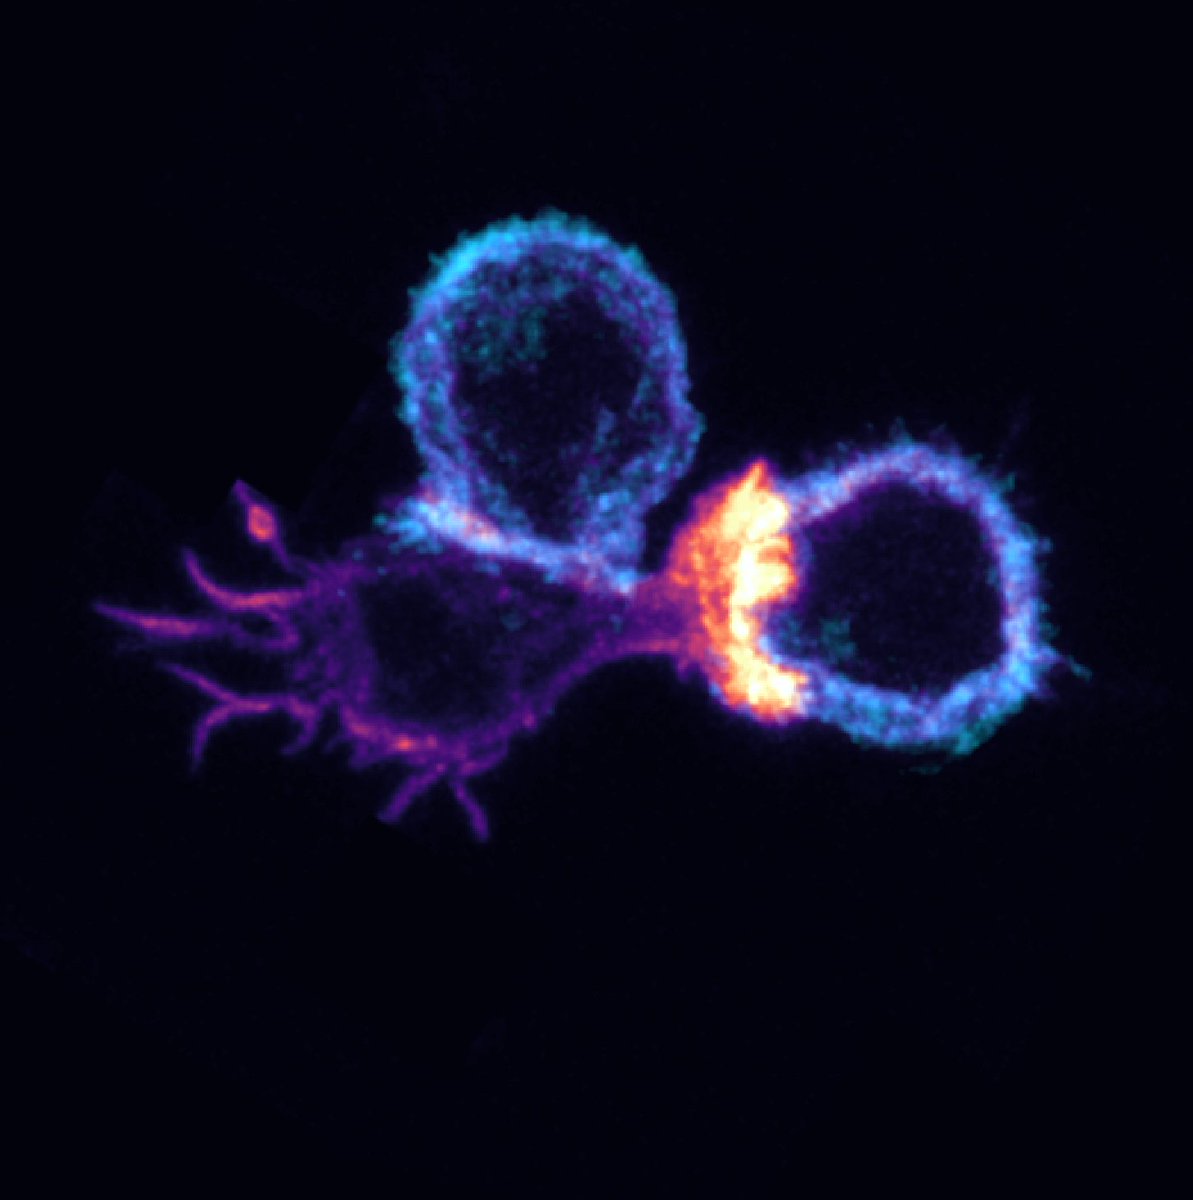 Don't know how this T cell (in violet) chose between both cancer cells (in blue) but it clearly had its preference and decided to form a huge actin protrusion on its favorite ☠️♥️

#FluorescenceFriday #SciComm #Microscopy